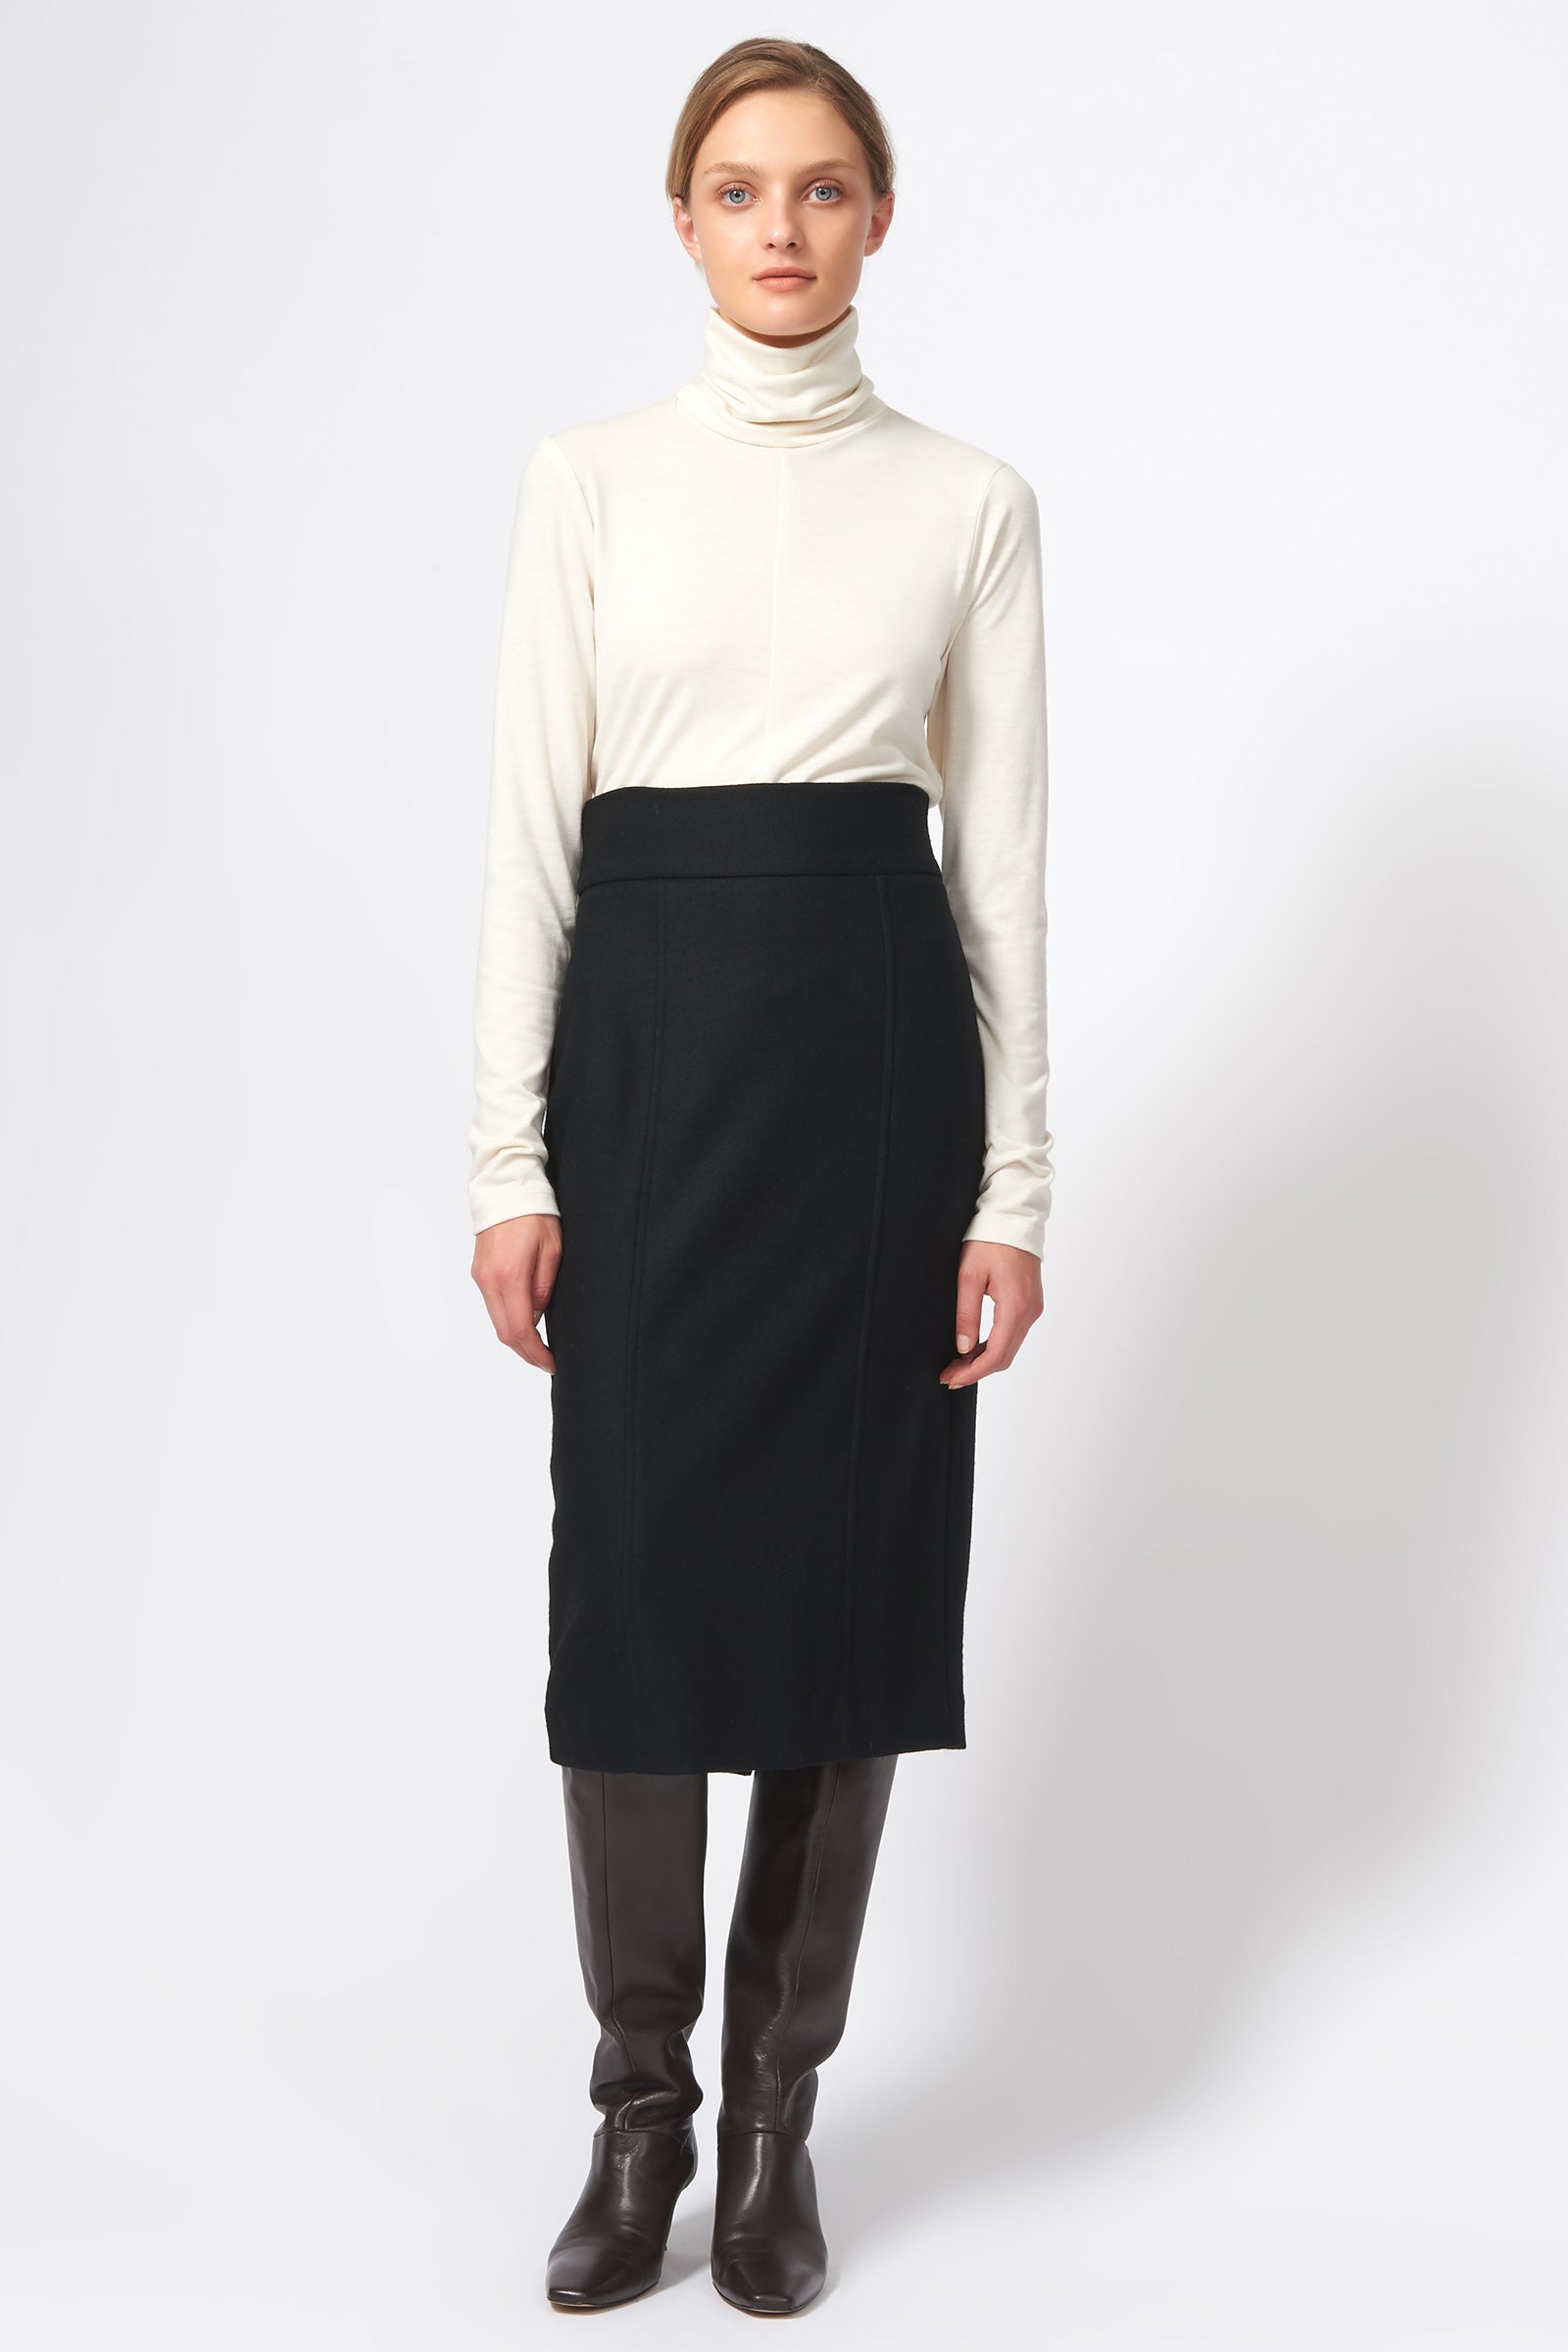 Kal Rieman High Waisted Pencil Skirt in Black on Model Full Front View